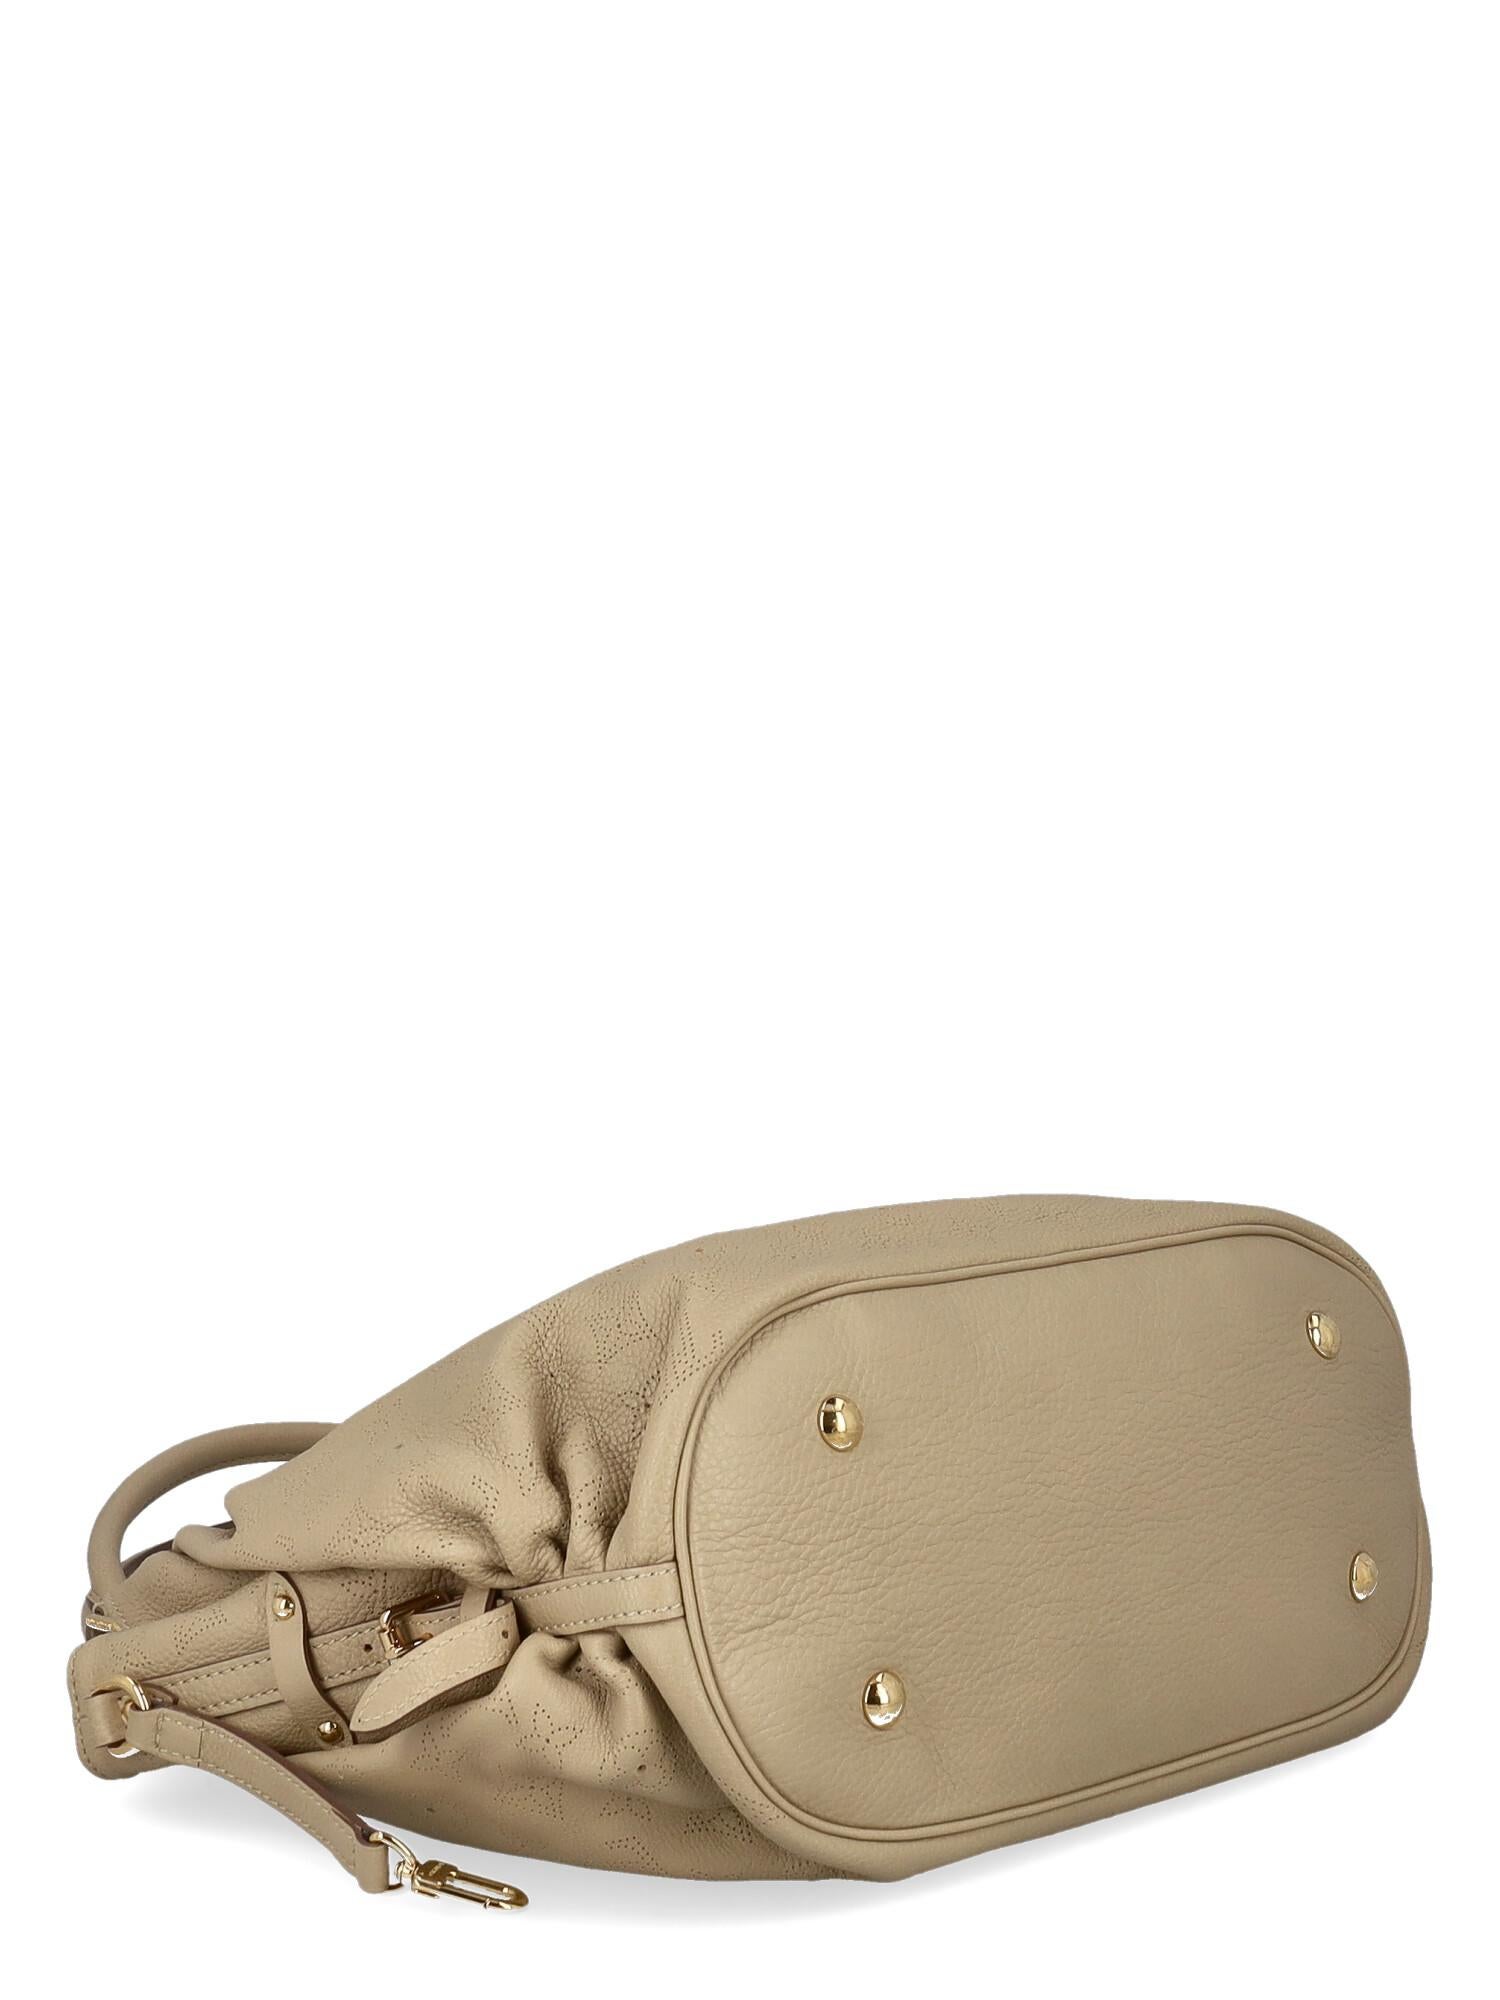 Louis Vuitton Women Shoulder bags Mahina Beige Leather  In Good Condition For Sale In Milan, IT